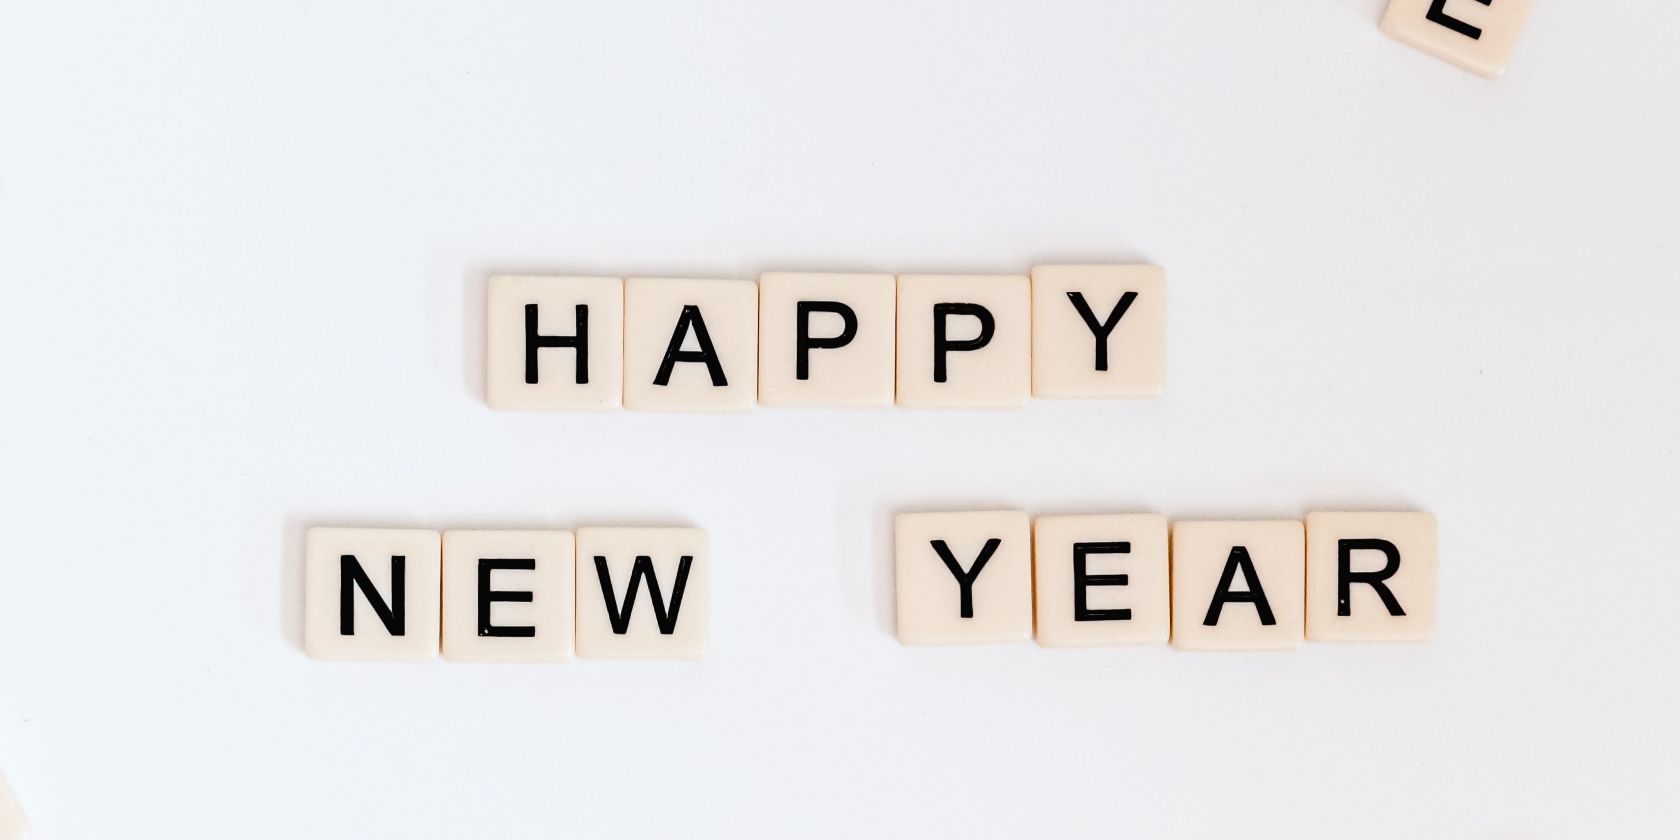 Photo showing Happy New Year in text form